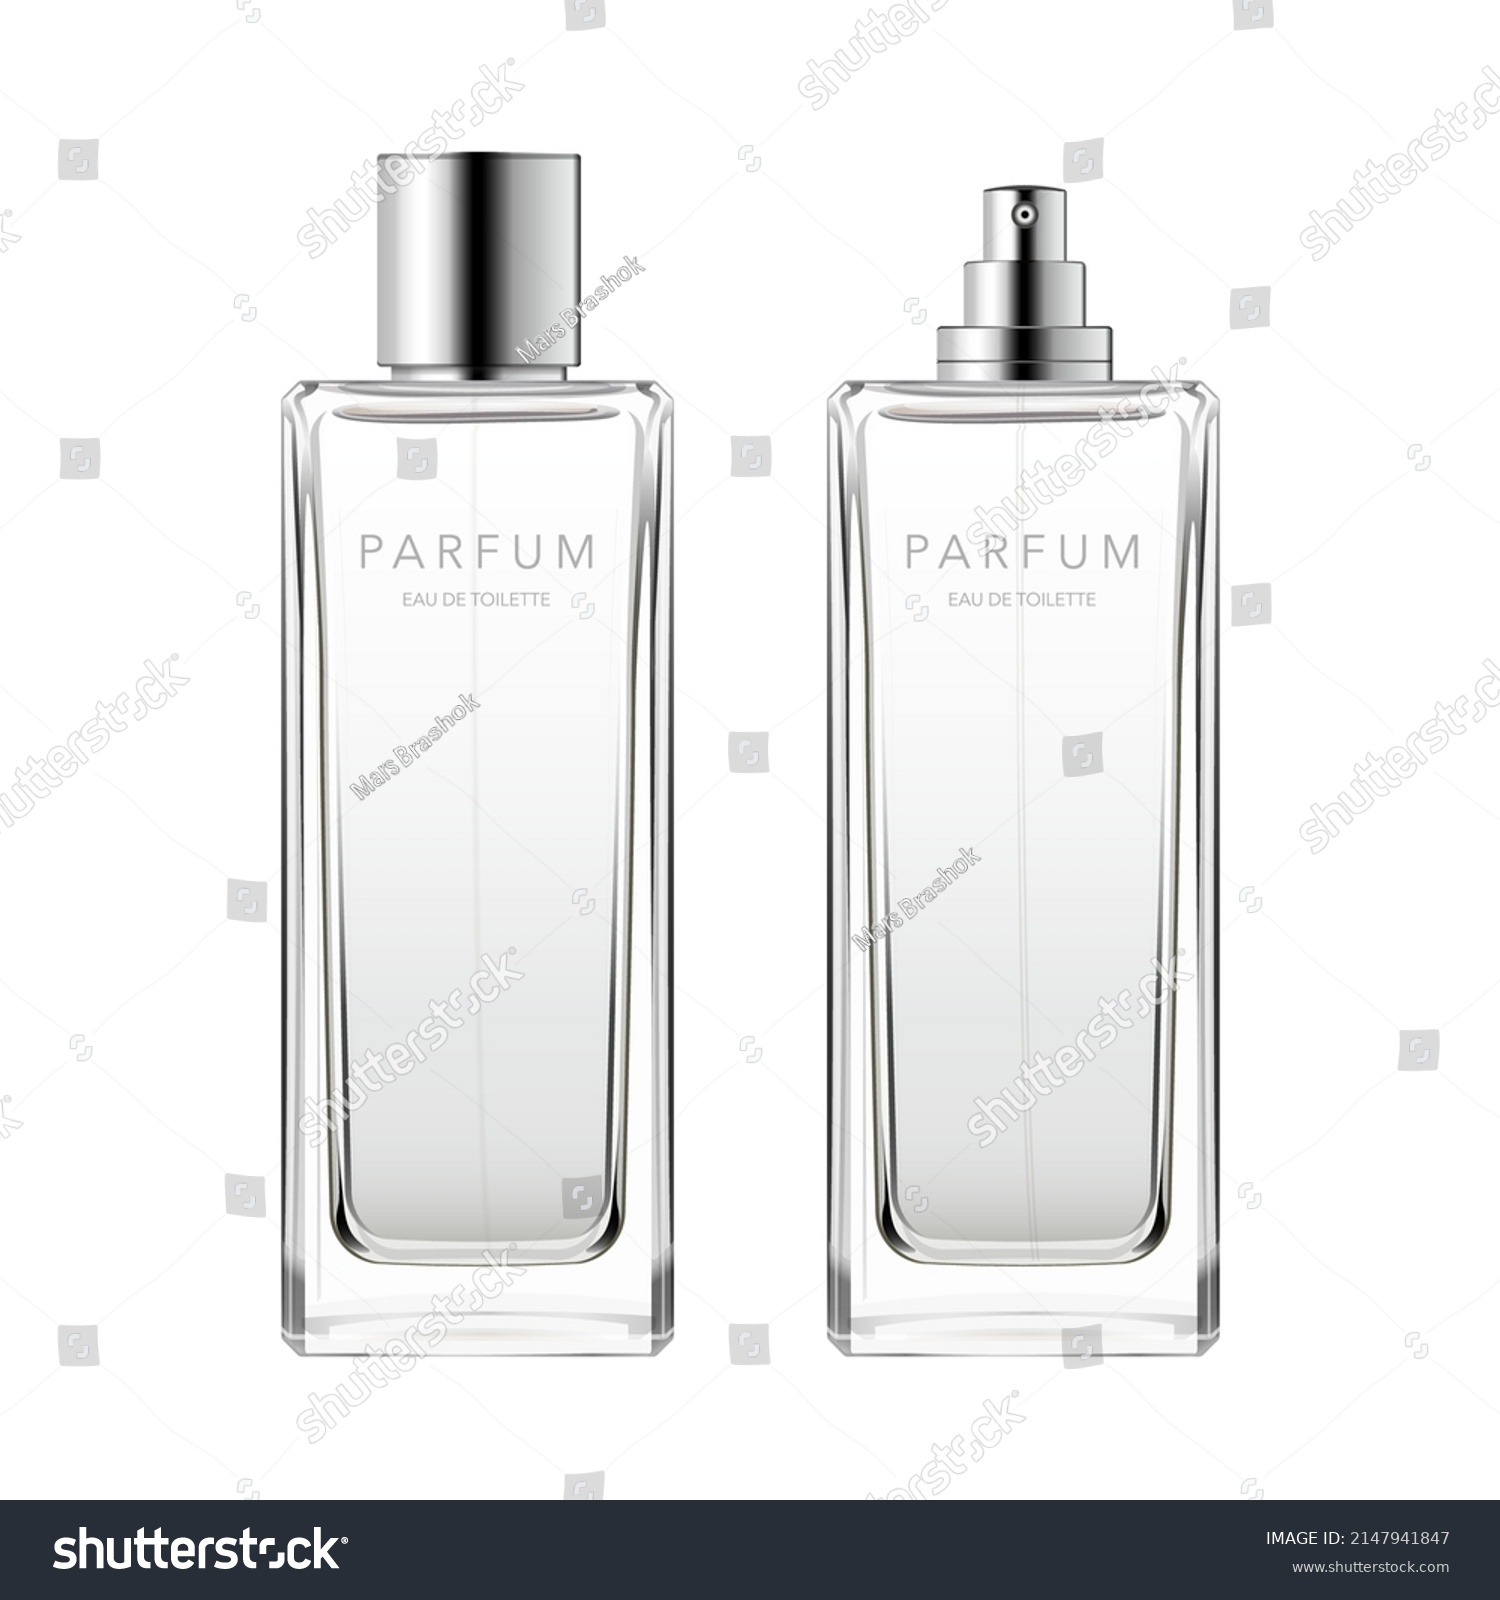 SVG of Perfume glass minimalist bottle. Square transparent fragrance packaging with steel cap, sprayer, text template, light liquid. 3d vector mockup for ad and branding. Beauty product illustration. svg